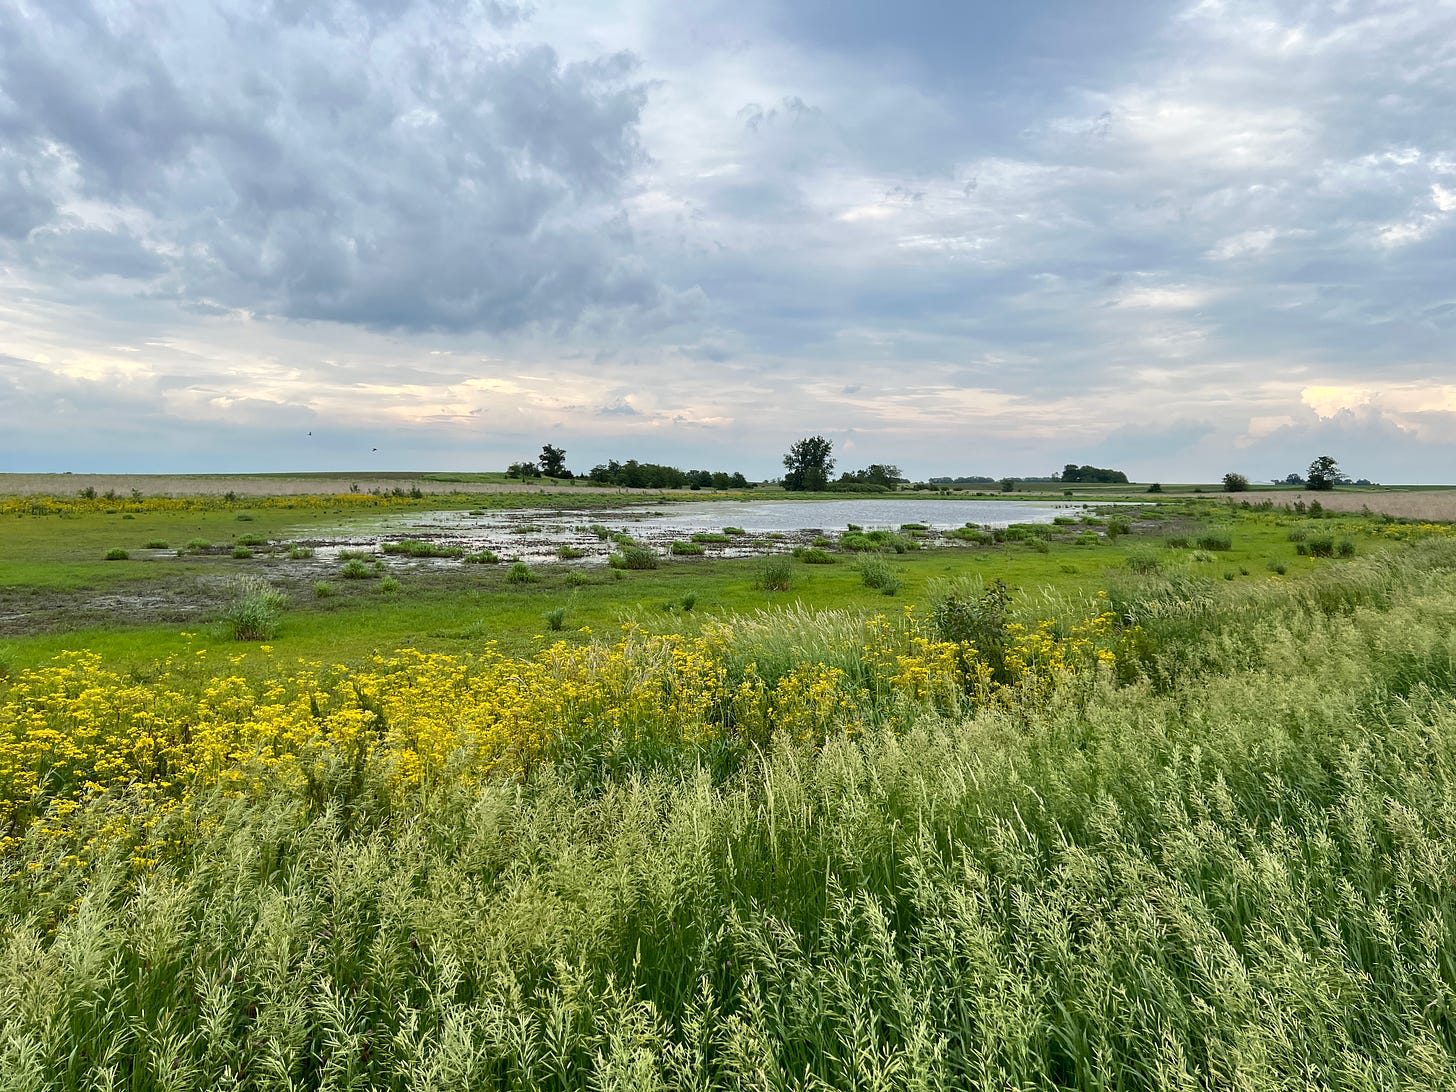 This restored wetland is shown in the distance. It is clearly shallow and surrounded by tall and short native grasses and flowers. The sky is blue and quite cloudy.